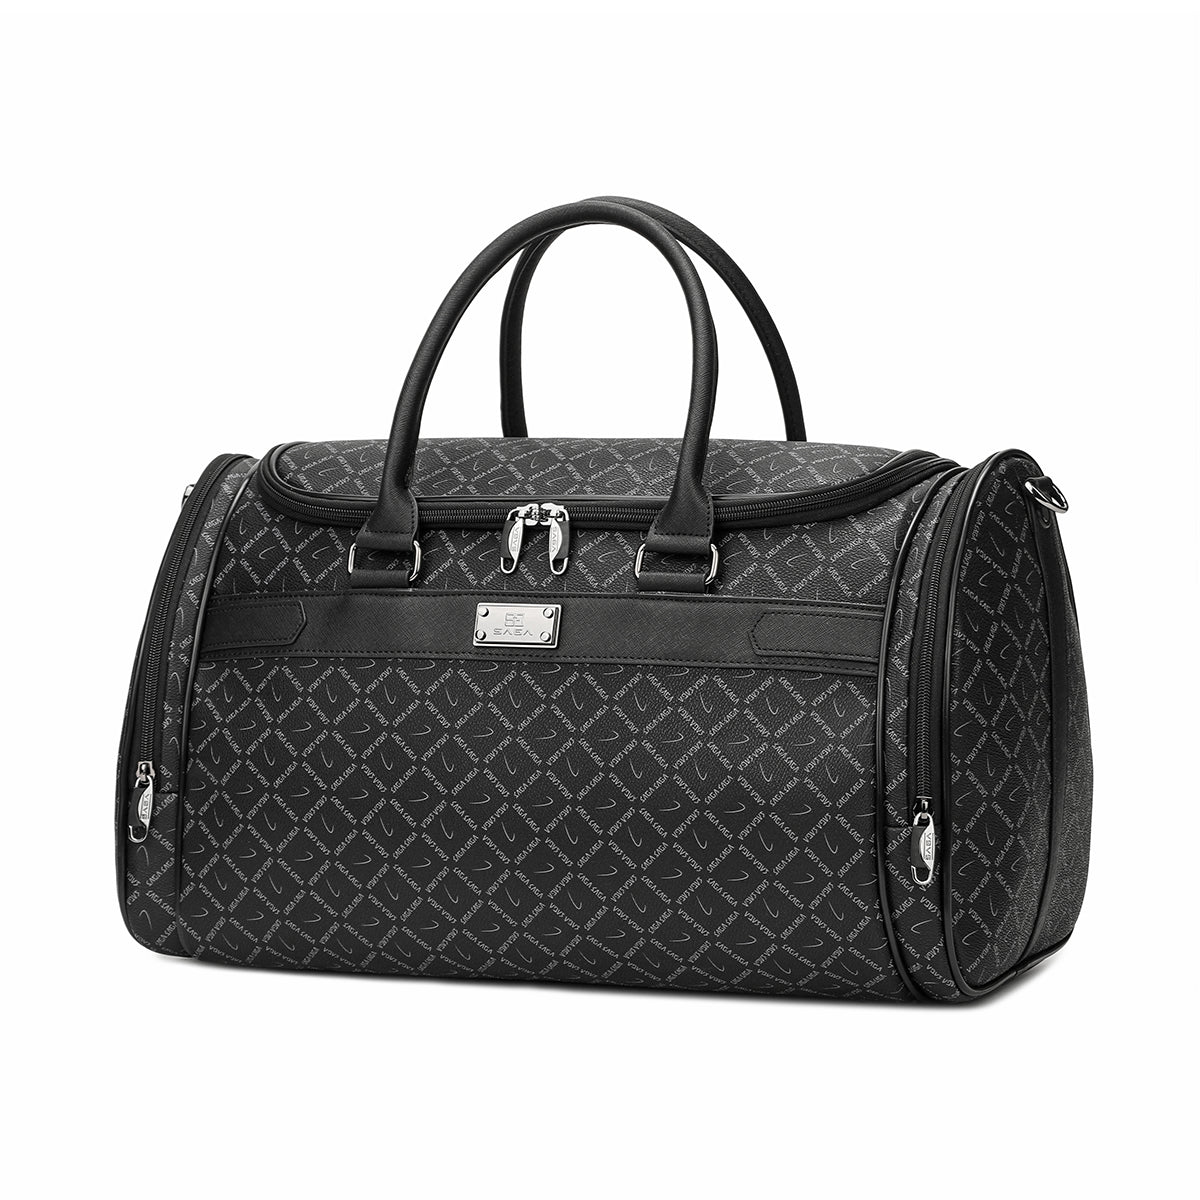 Luxurious travel bags set of 6 pieces, gray color